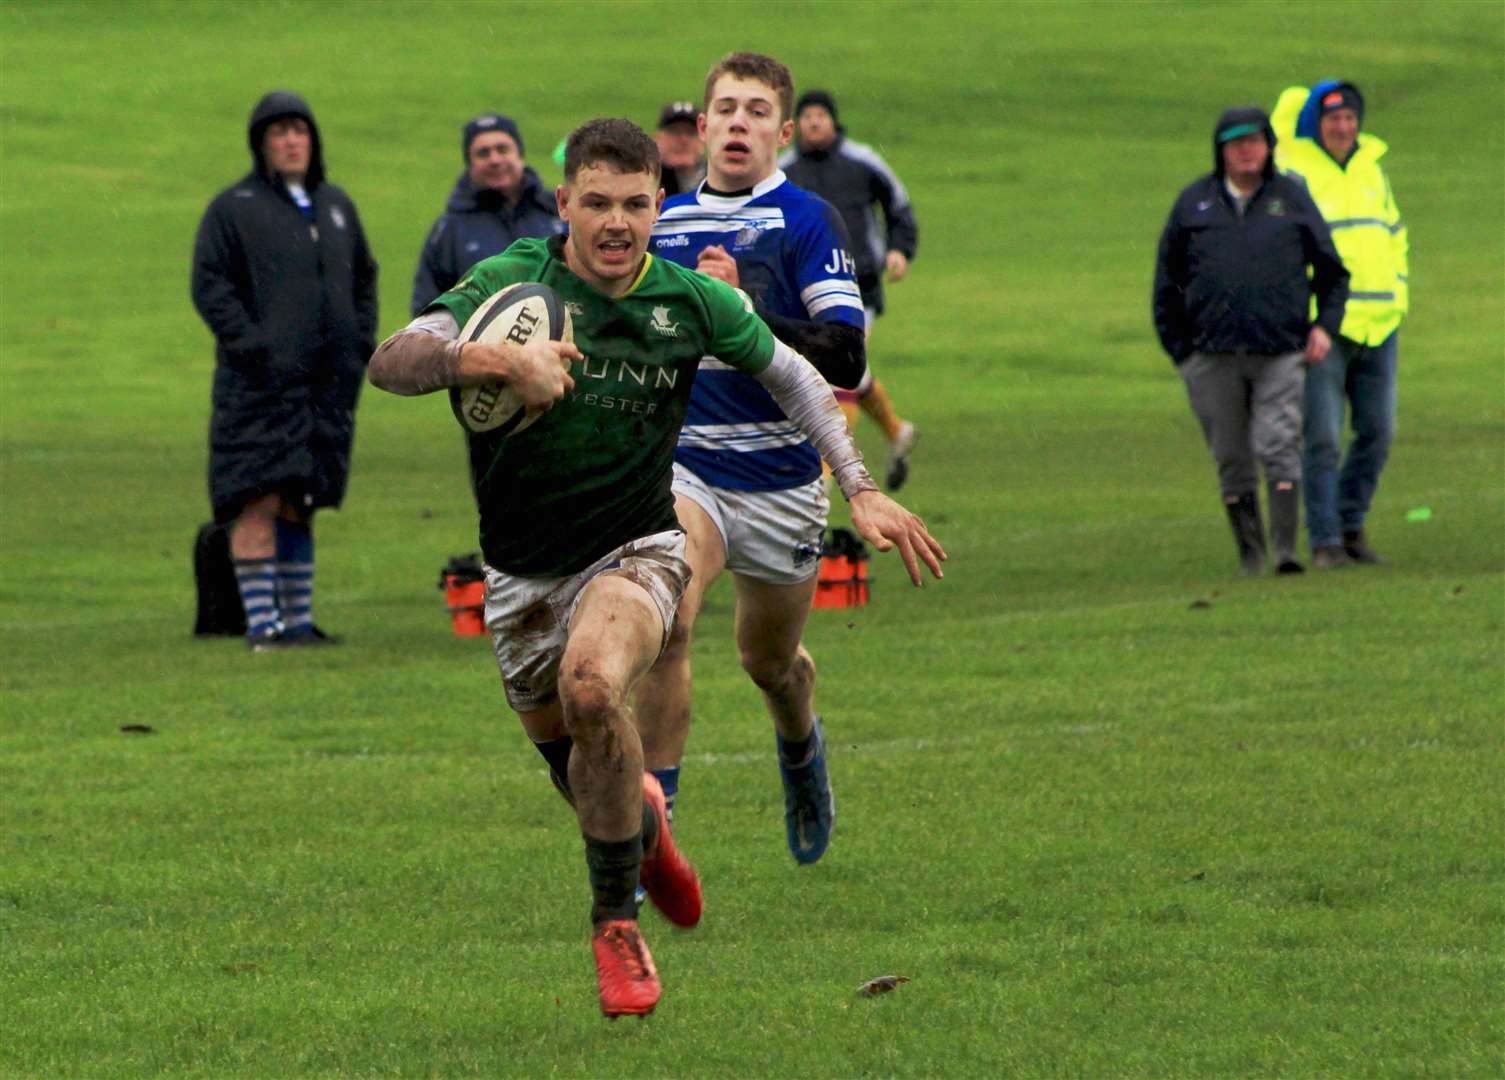 Cameron Ryder races through for the Greens' bonus-point fourth try against Dunfermline. Pictures: Alan Hendry